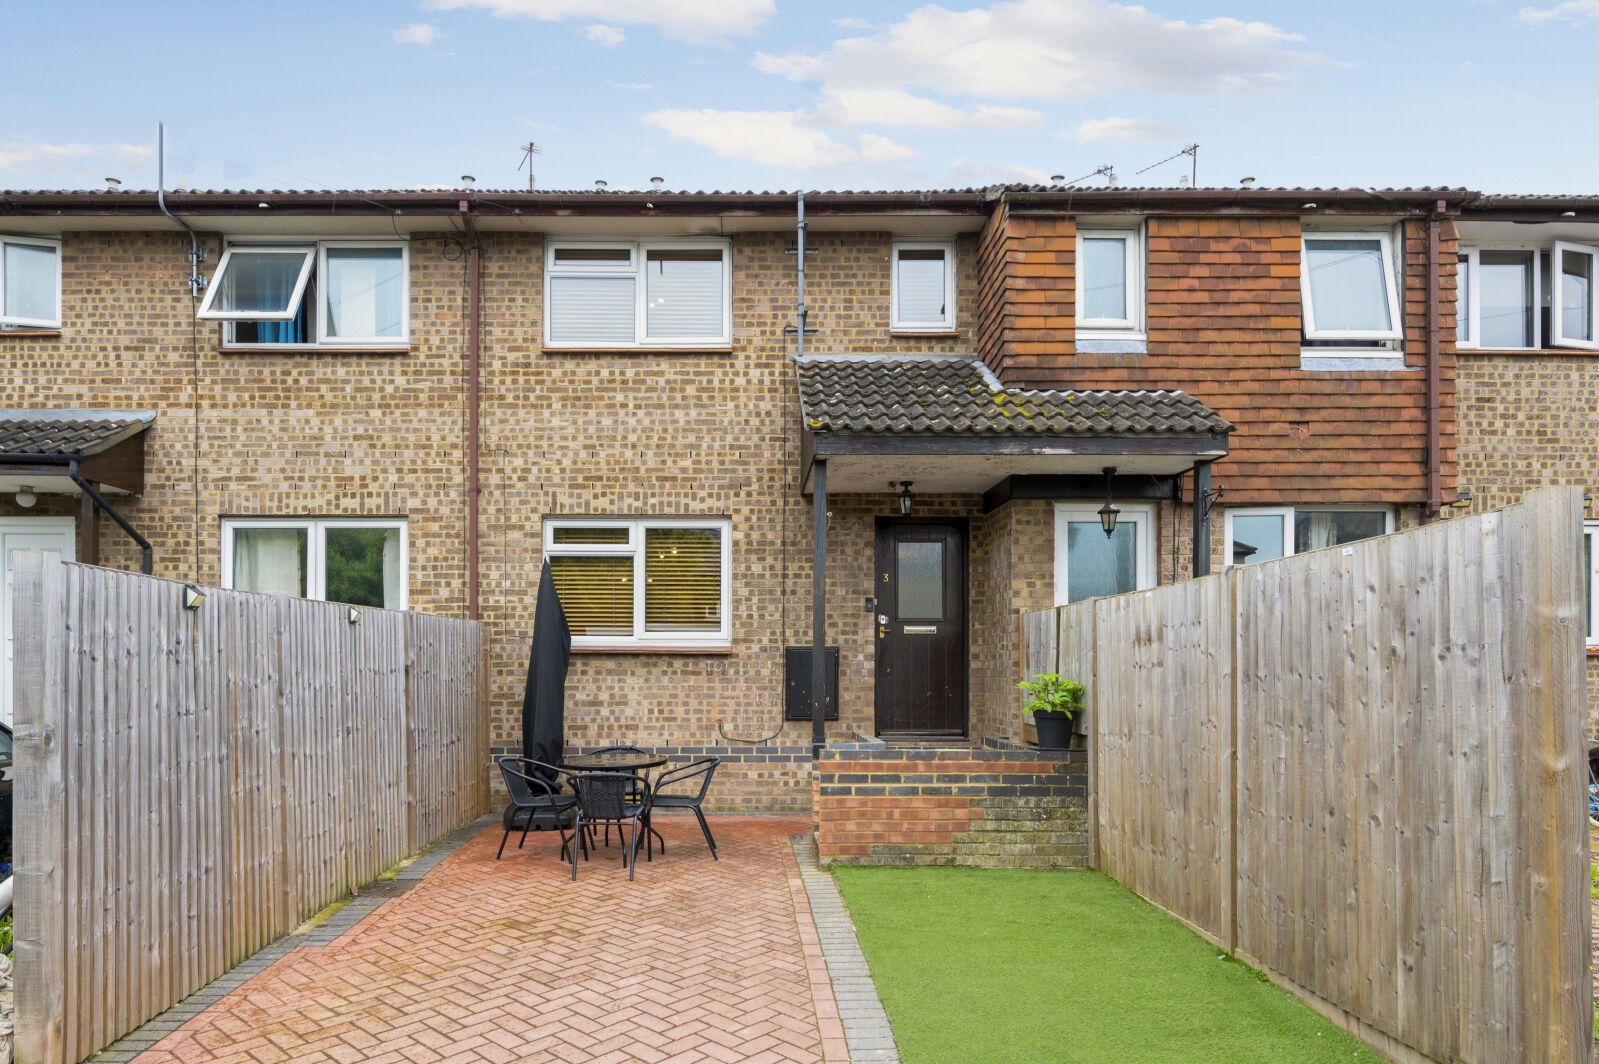 2 bedroom mid terraced house for sale Vale Road South, Surbiton, KT6, main image